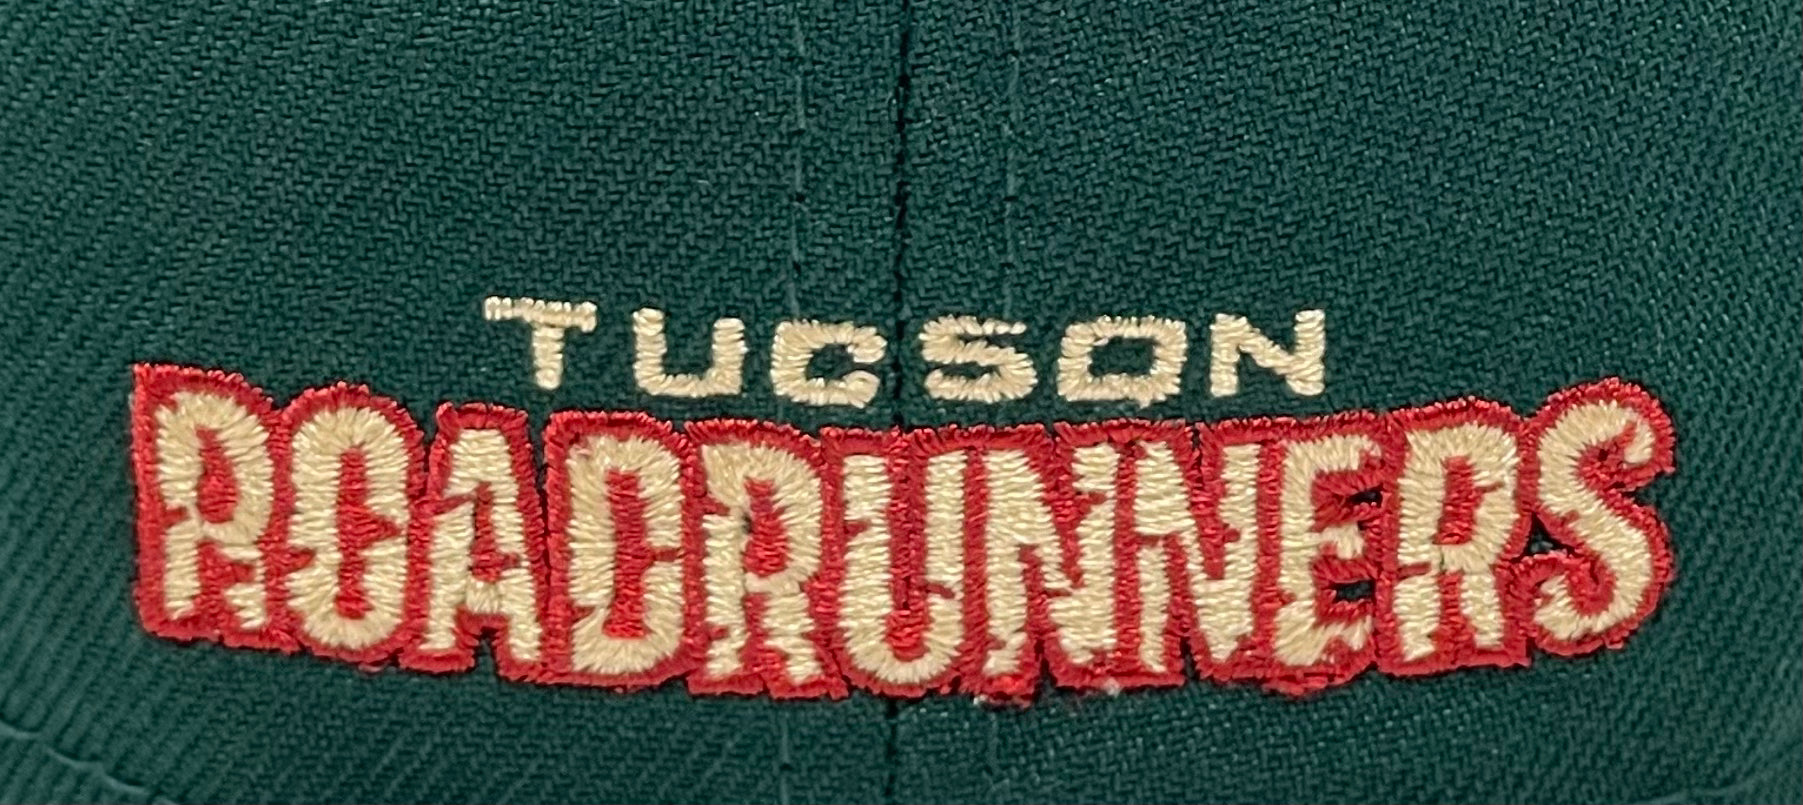 TUCSON ROADRUNNERS (GREEN) NEW ERA 59FIFTY EXCLUSIVE FITTED